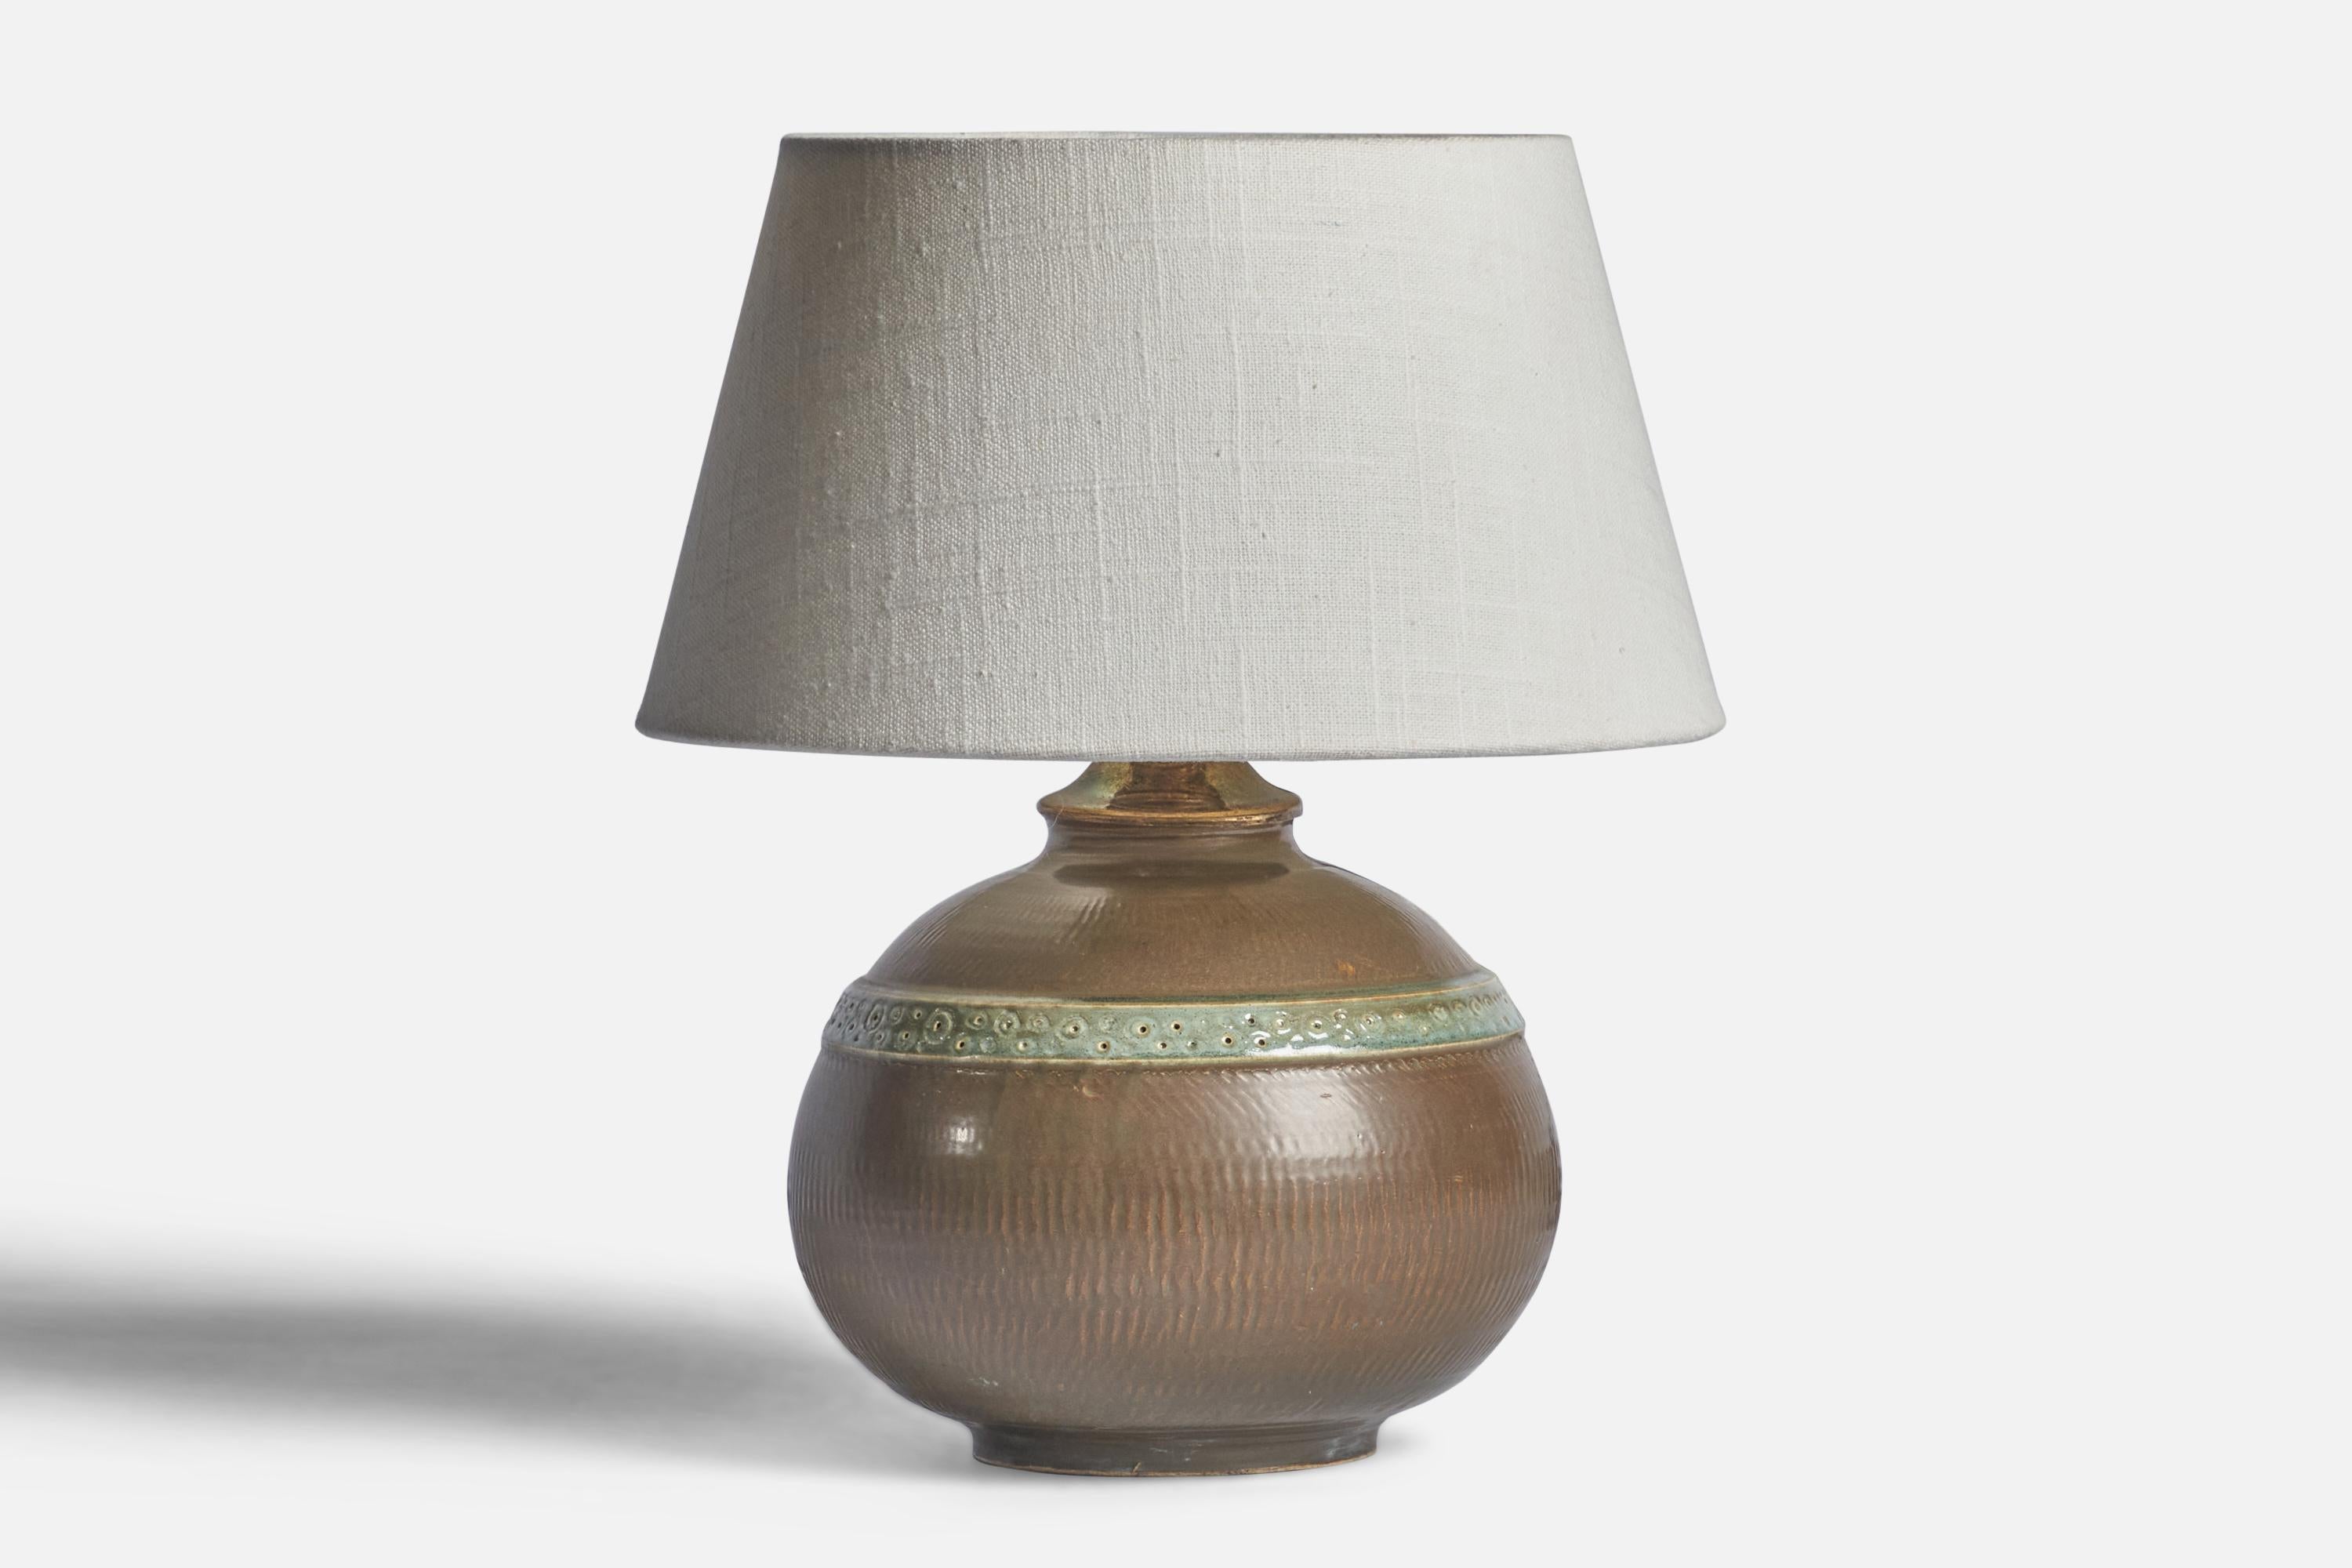 A green-glazed stoneware table lamp designed by Stig Lindberg and produced by Gustavsberg, Sweden, c. 1960s.

Dimensions of Lamp (inches): 8.75” H x 7” Diameter
Dimensions of Shade (inches): 7” Top Diameter x 10” Bottom Diameter x 5.5” H 
Dimensions